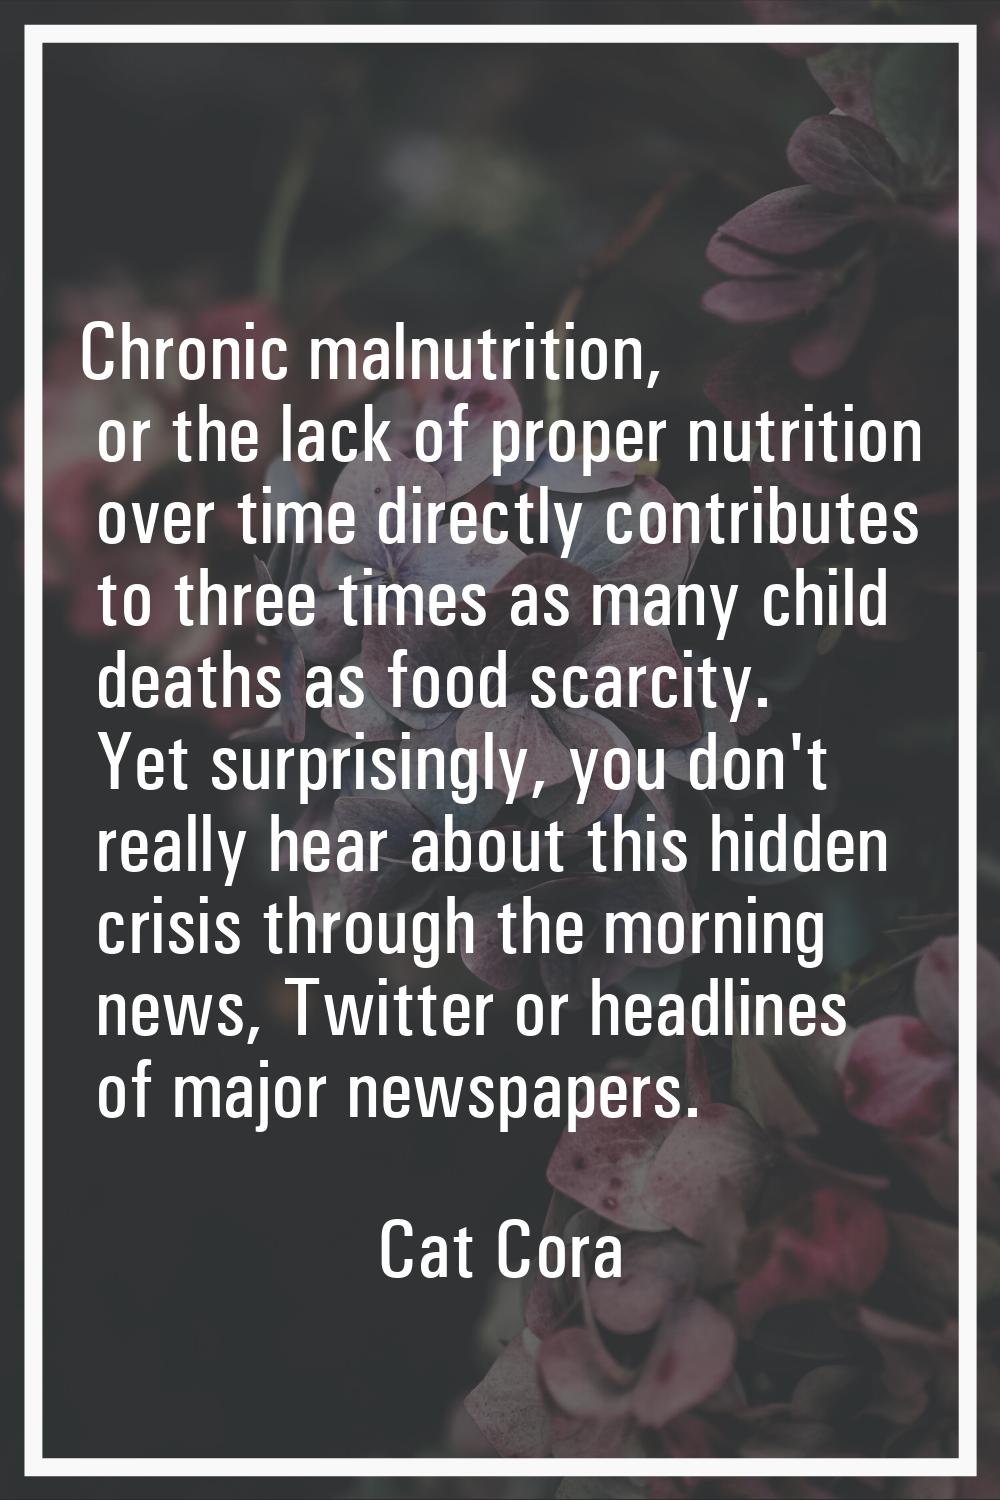 Chronic malnutrition, or the lack of proper nutrition over time directly contributes to three times